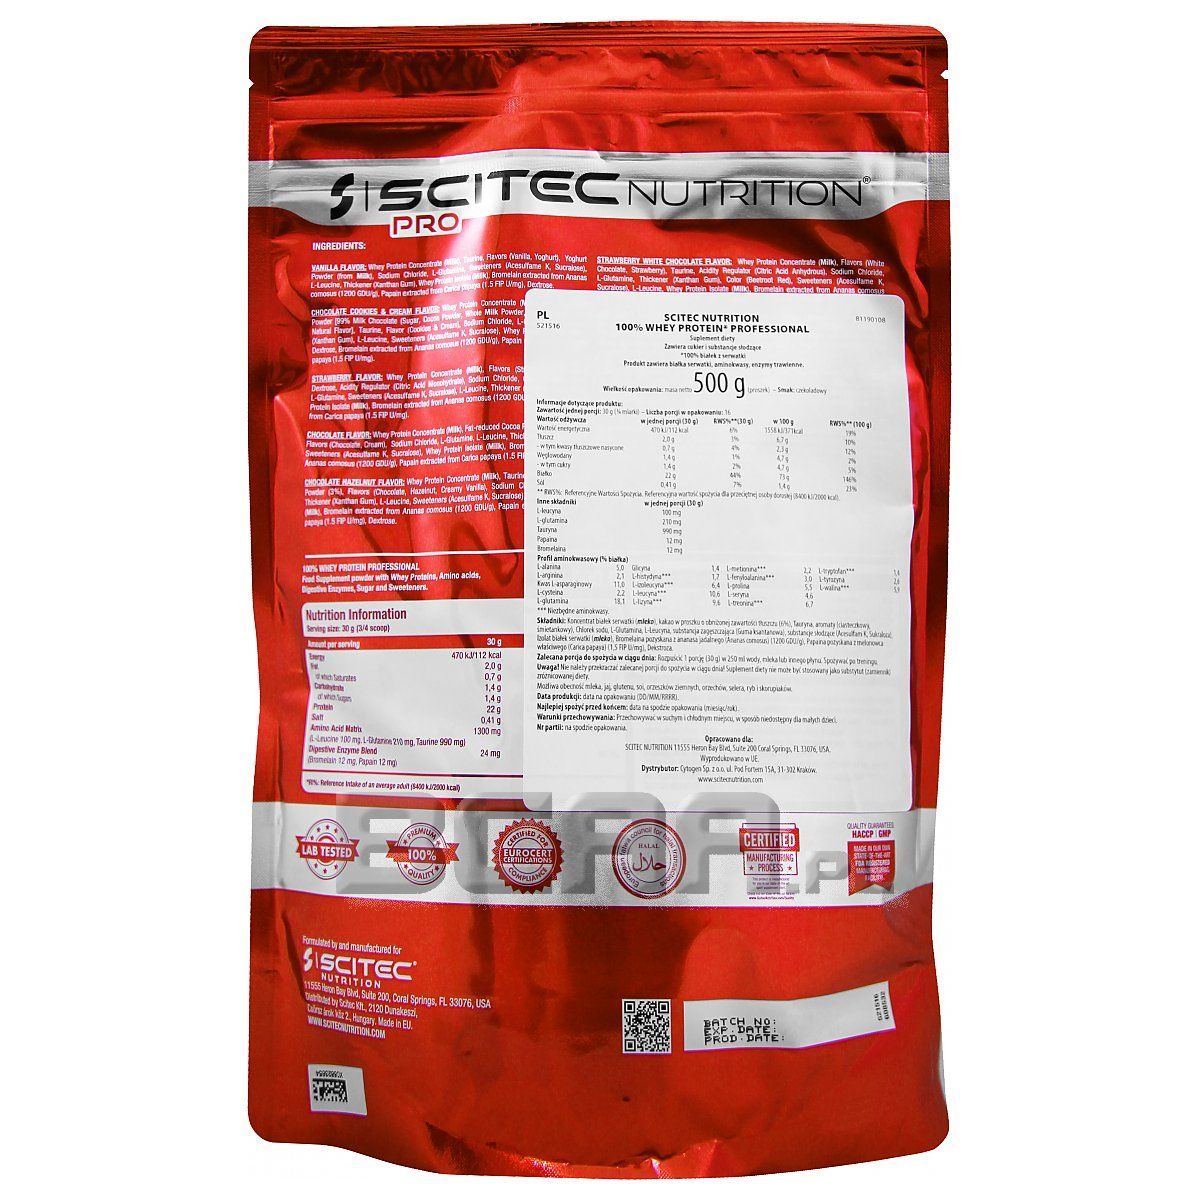 SCITEC NUTRITION - 100% WHEY PROTEIN PROFESSIONAL - 500 G